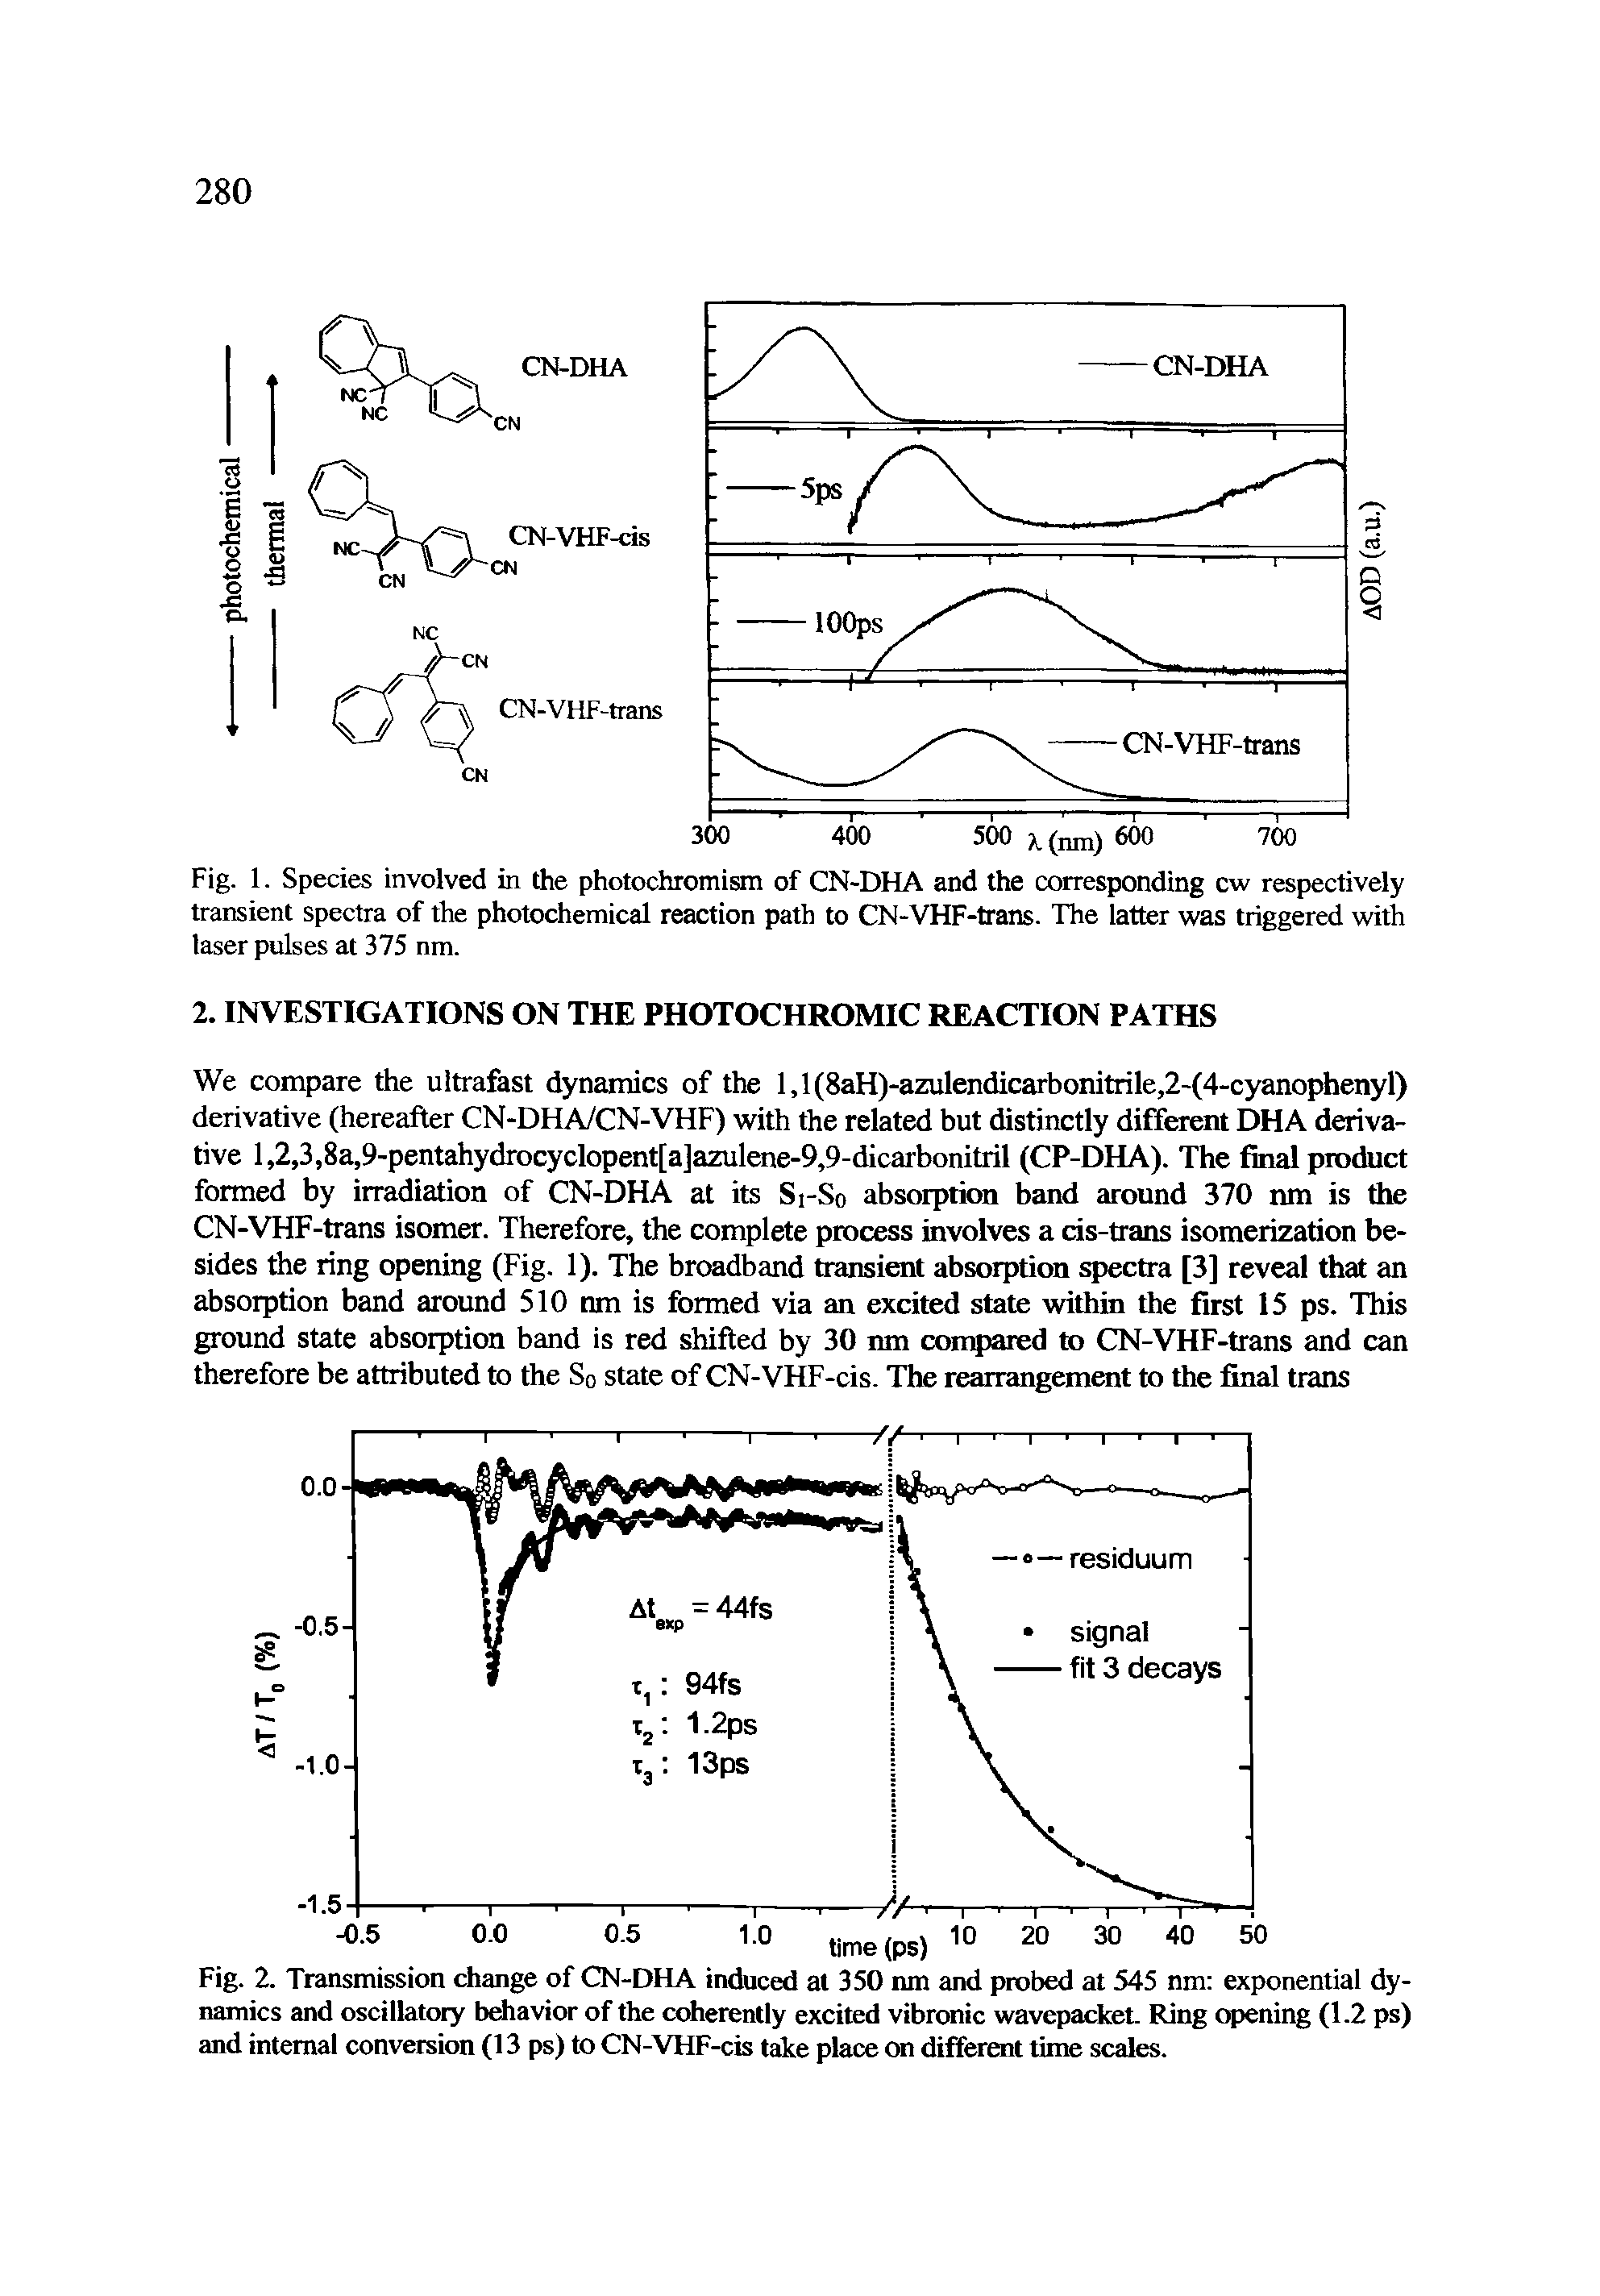 Fig. 2. Transmission change of CN-DHA induced at 350 nm and probed at 545 nm exponential dynamics and oscillatory behavior of the coherently excited vibronic wavepacket. Ring opening (1.2 ps) and internal conversion (13 ps) to CN-VHF-cis take place on different time scales.